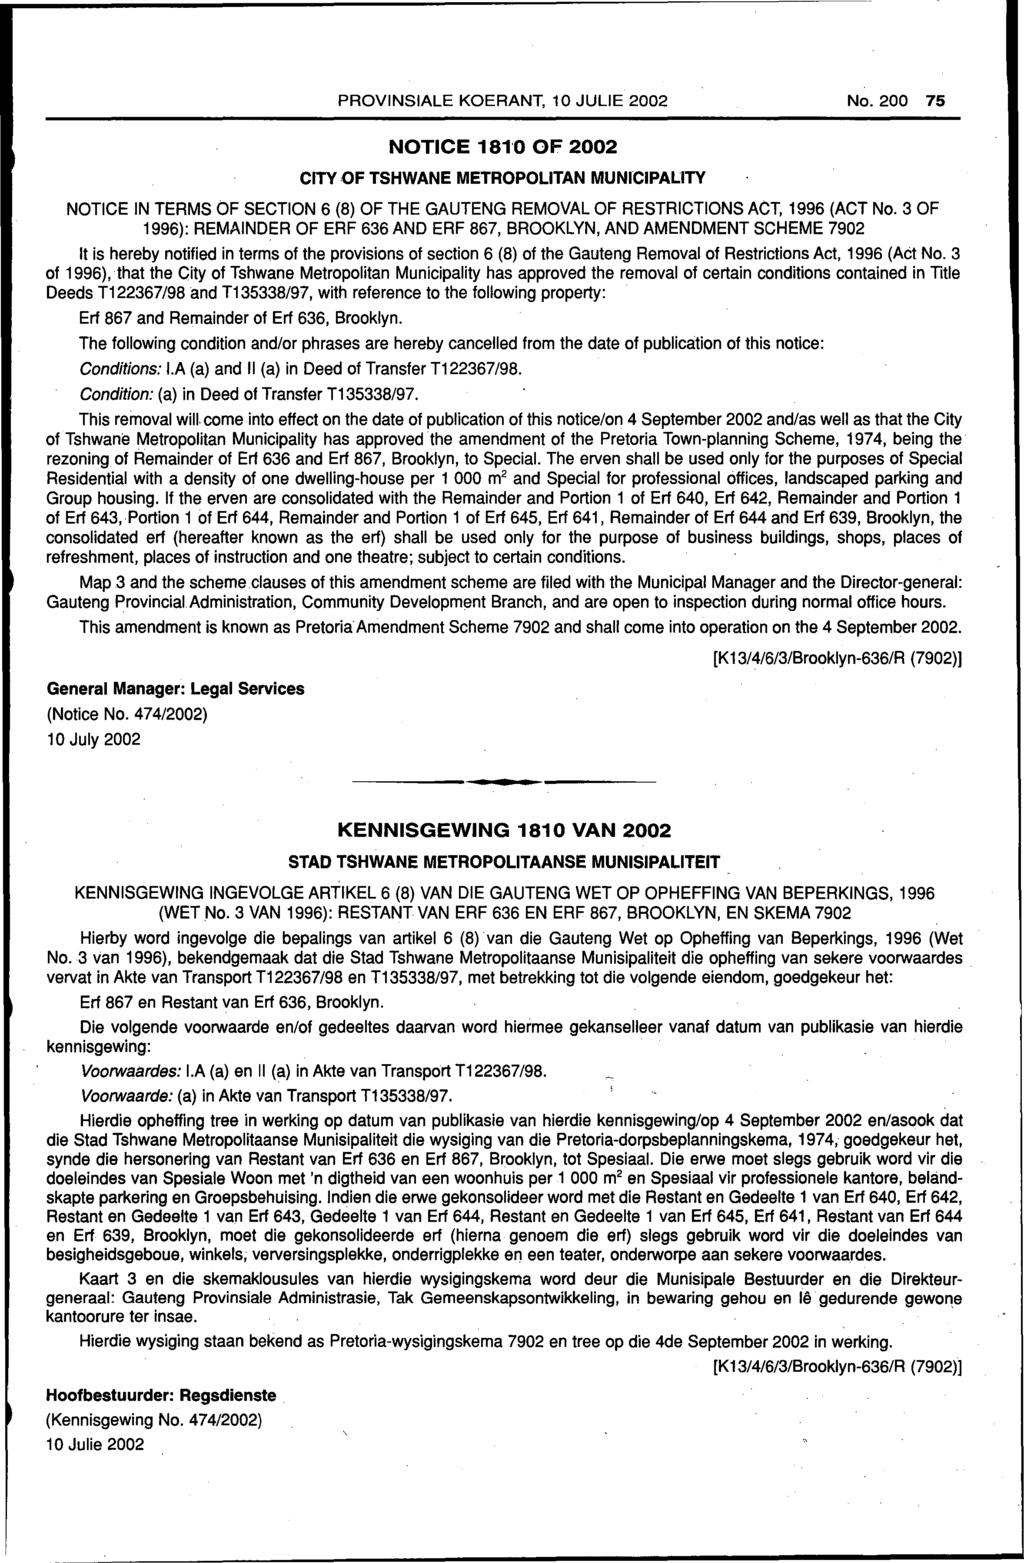 PROVINSIALE KOERANT, 10 JULIE 2002 No. 200 75 NOTICE 181'0 OF 2002 CITY,Of TSHWANE METROPOLITAN MUNICIPALITY NOTICE IN TERMS OF SECTION 6 (8) OF THE GAUTENG REMOVAL OF RESTRICTIONS ACT, 1996 (ACT No.